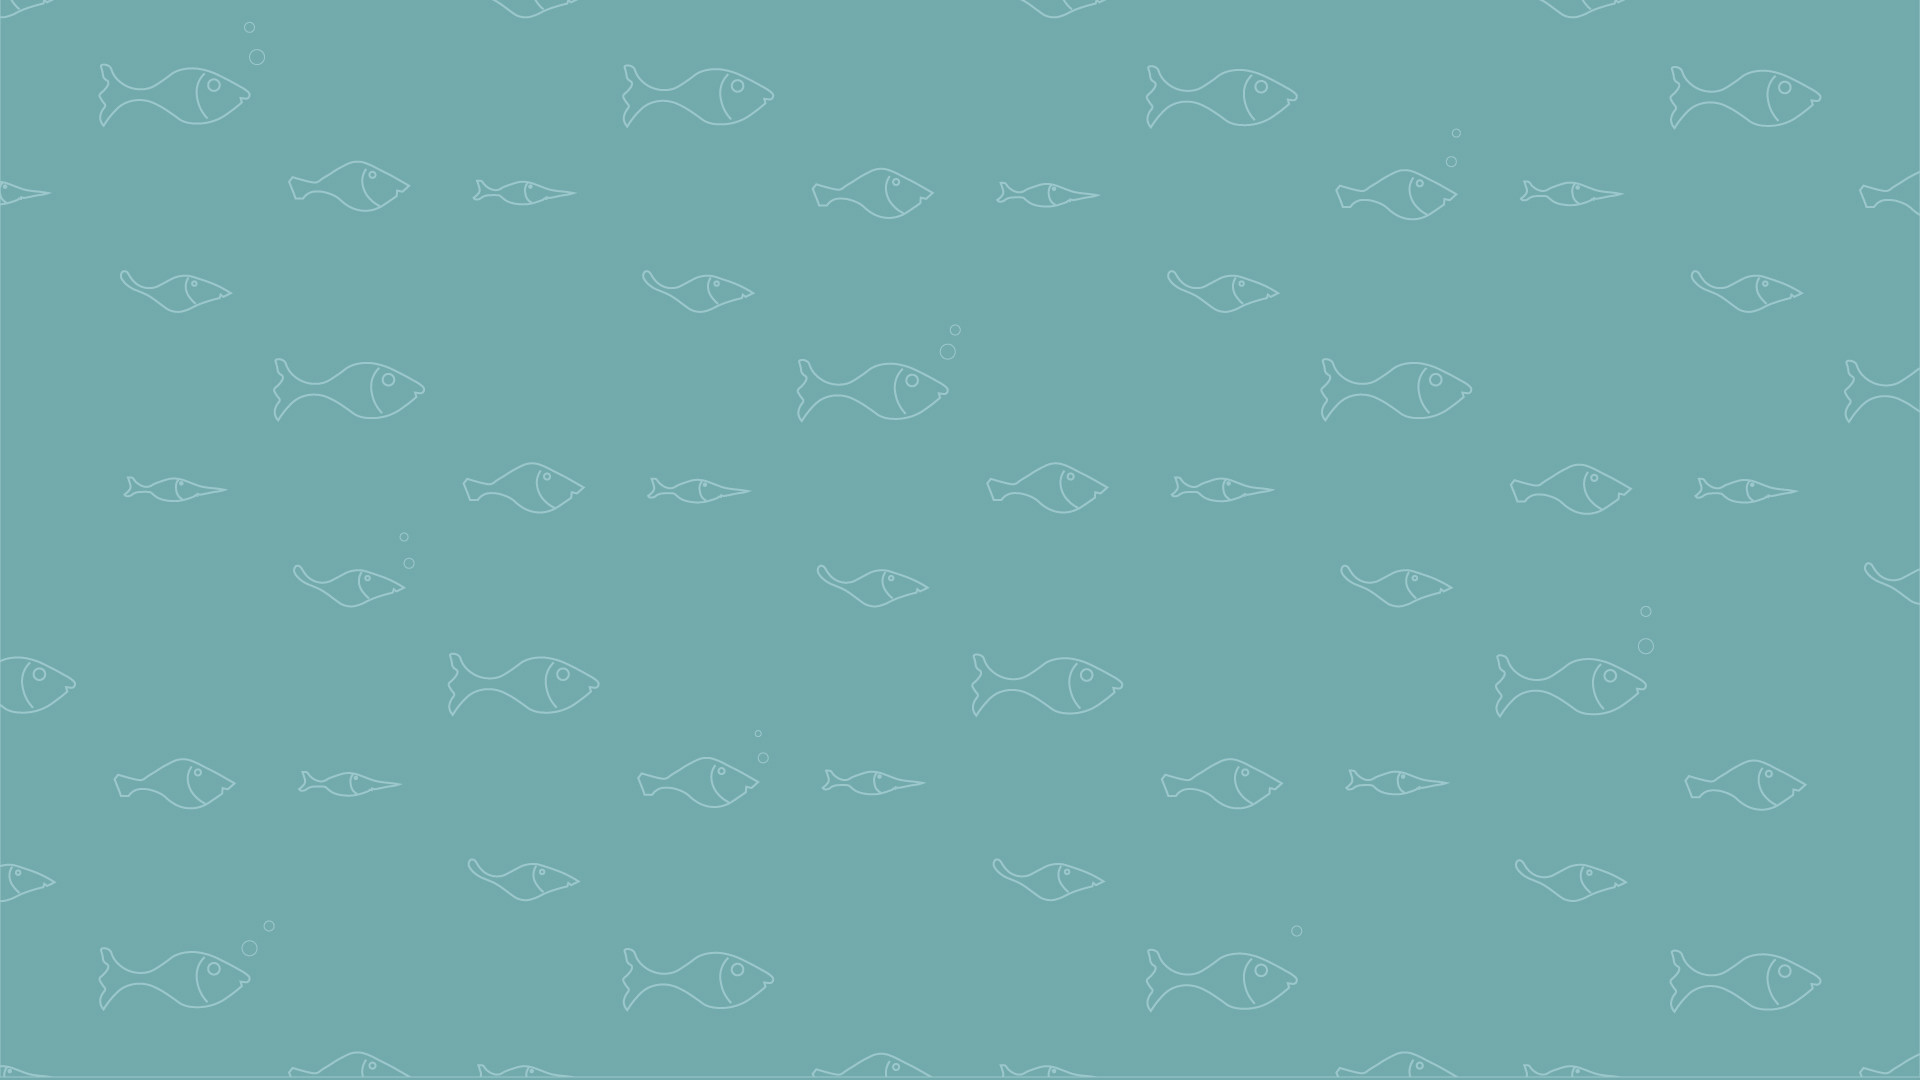 1920x1080 Fish background pattern vector